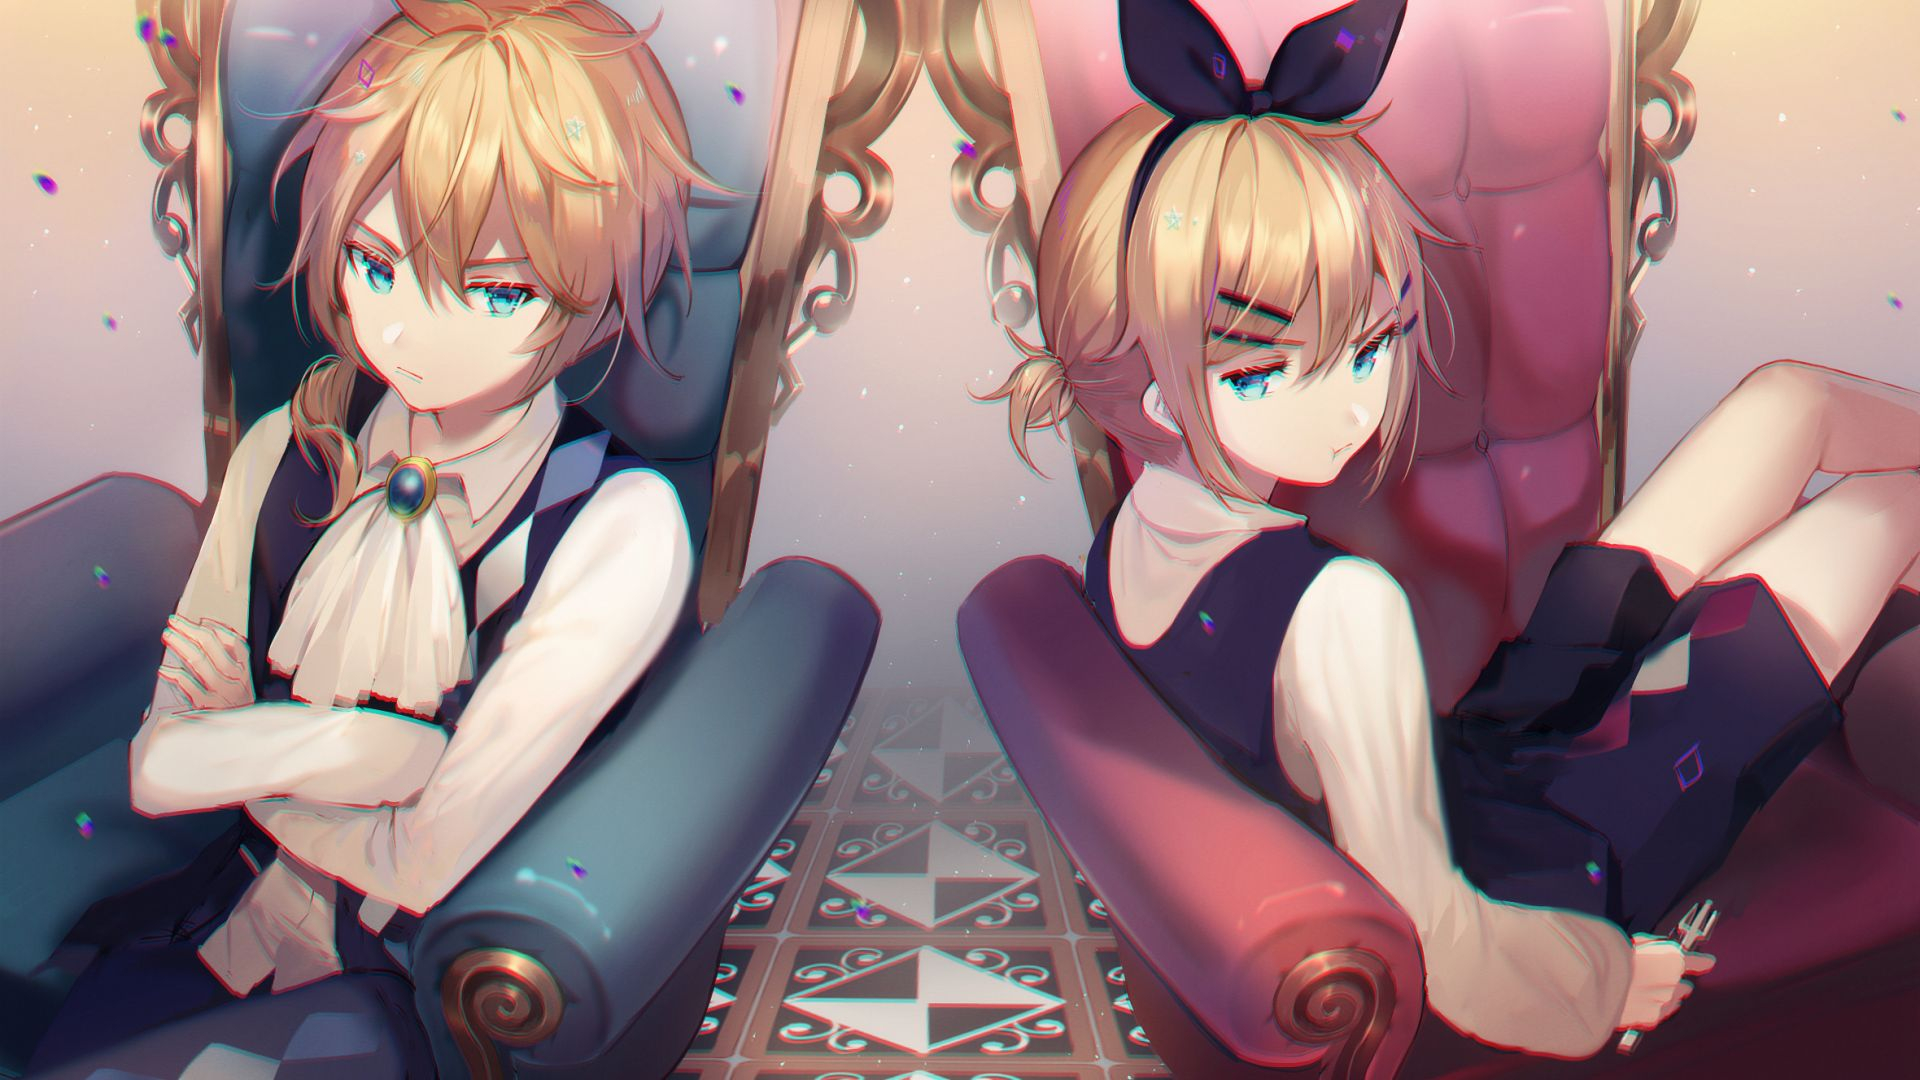 1920x1080 Desktop Wallpaper Kagamine Rin, Kagamine Len, Vocaloid, Angry, Sitting, Hd Image, Picture, Background, 1e7cd6